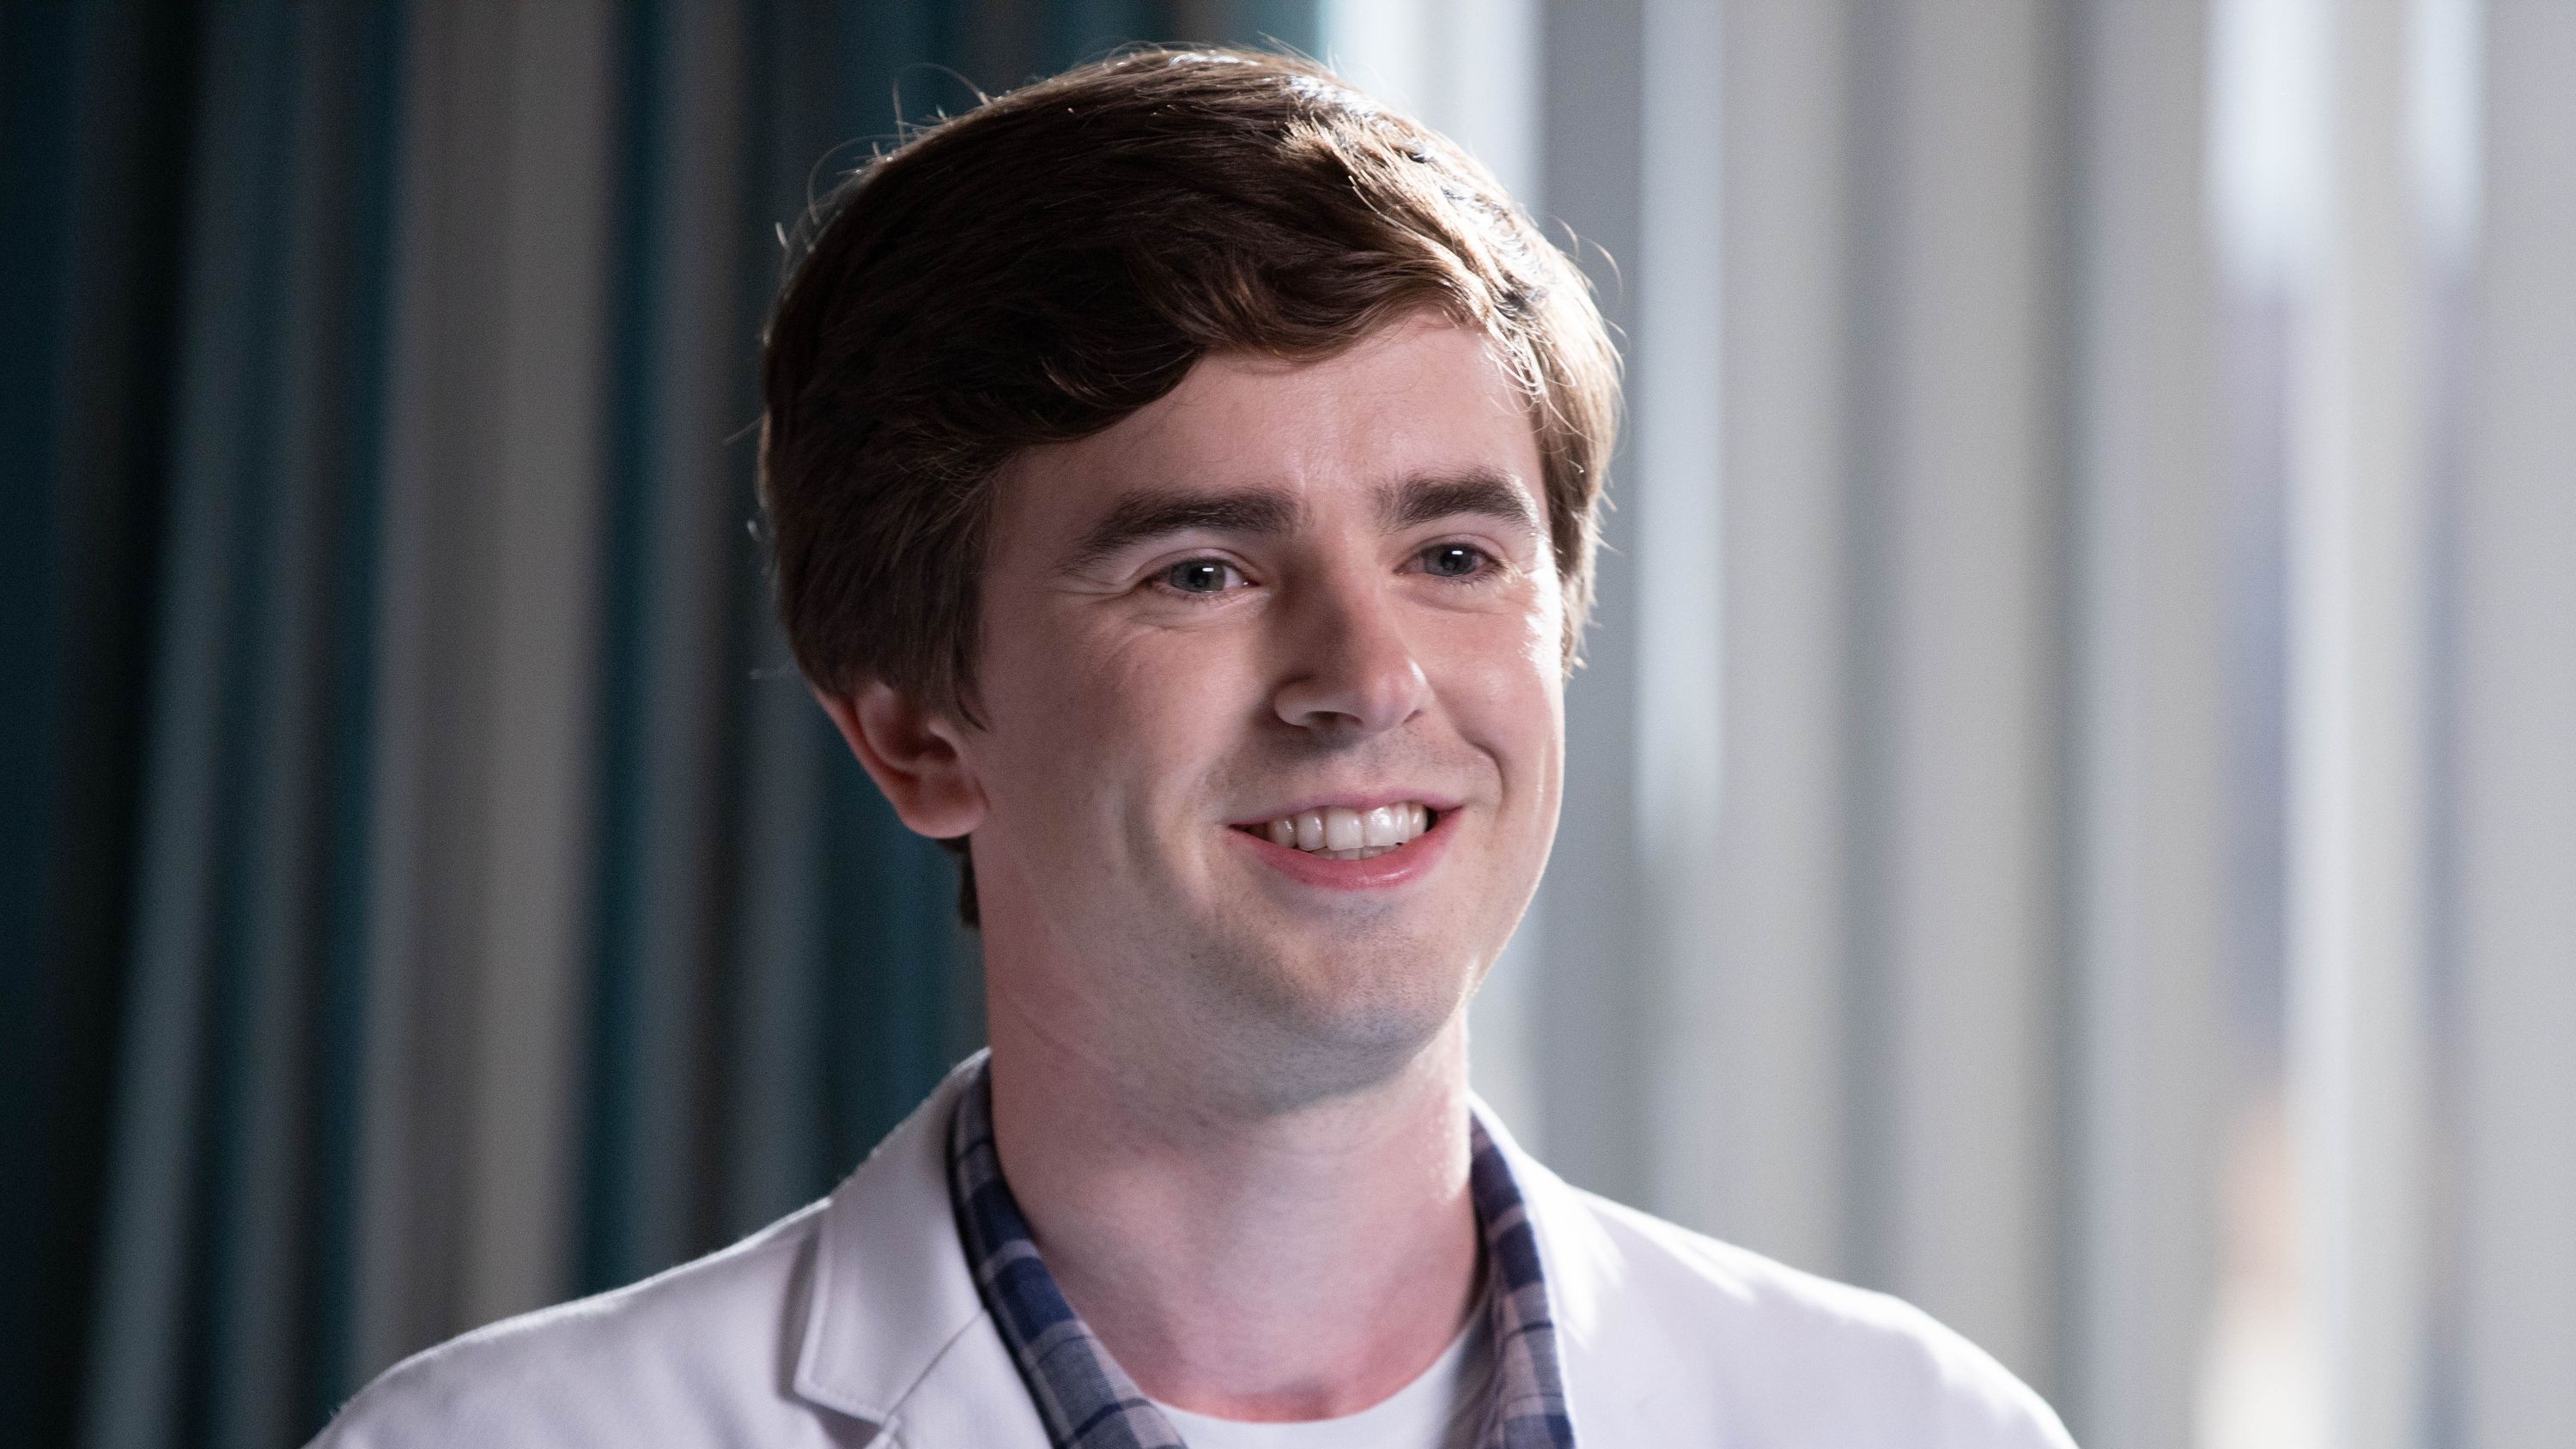 https://hips.hearstapps.com/hmg-prod/images/the-good-doctor-freddie-highmore-autism-1571691391.jpg?crop=1xw:0.84375xh;center,top